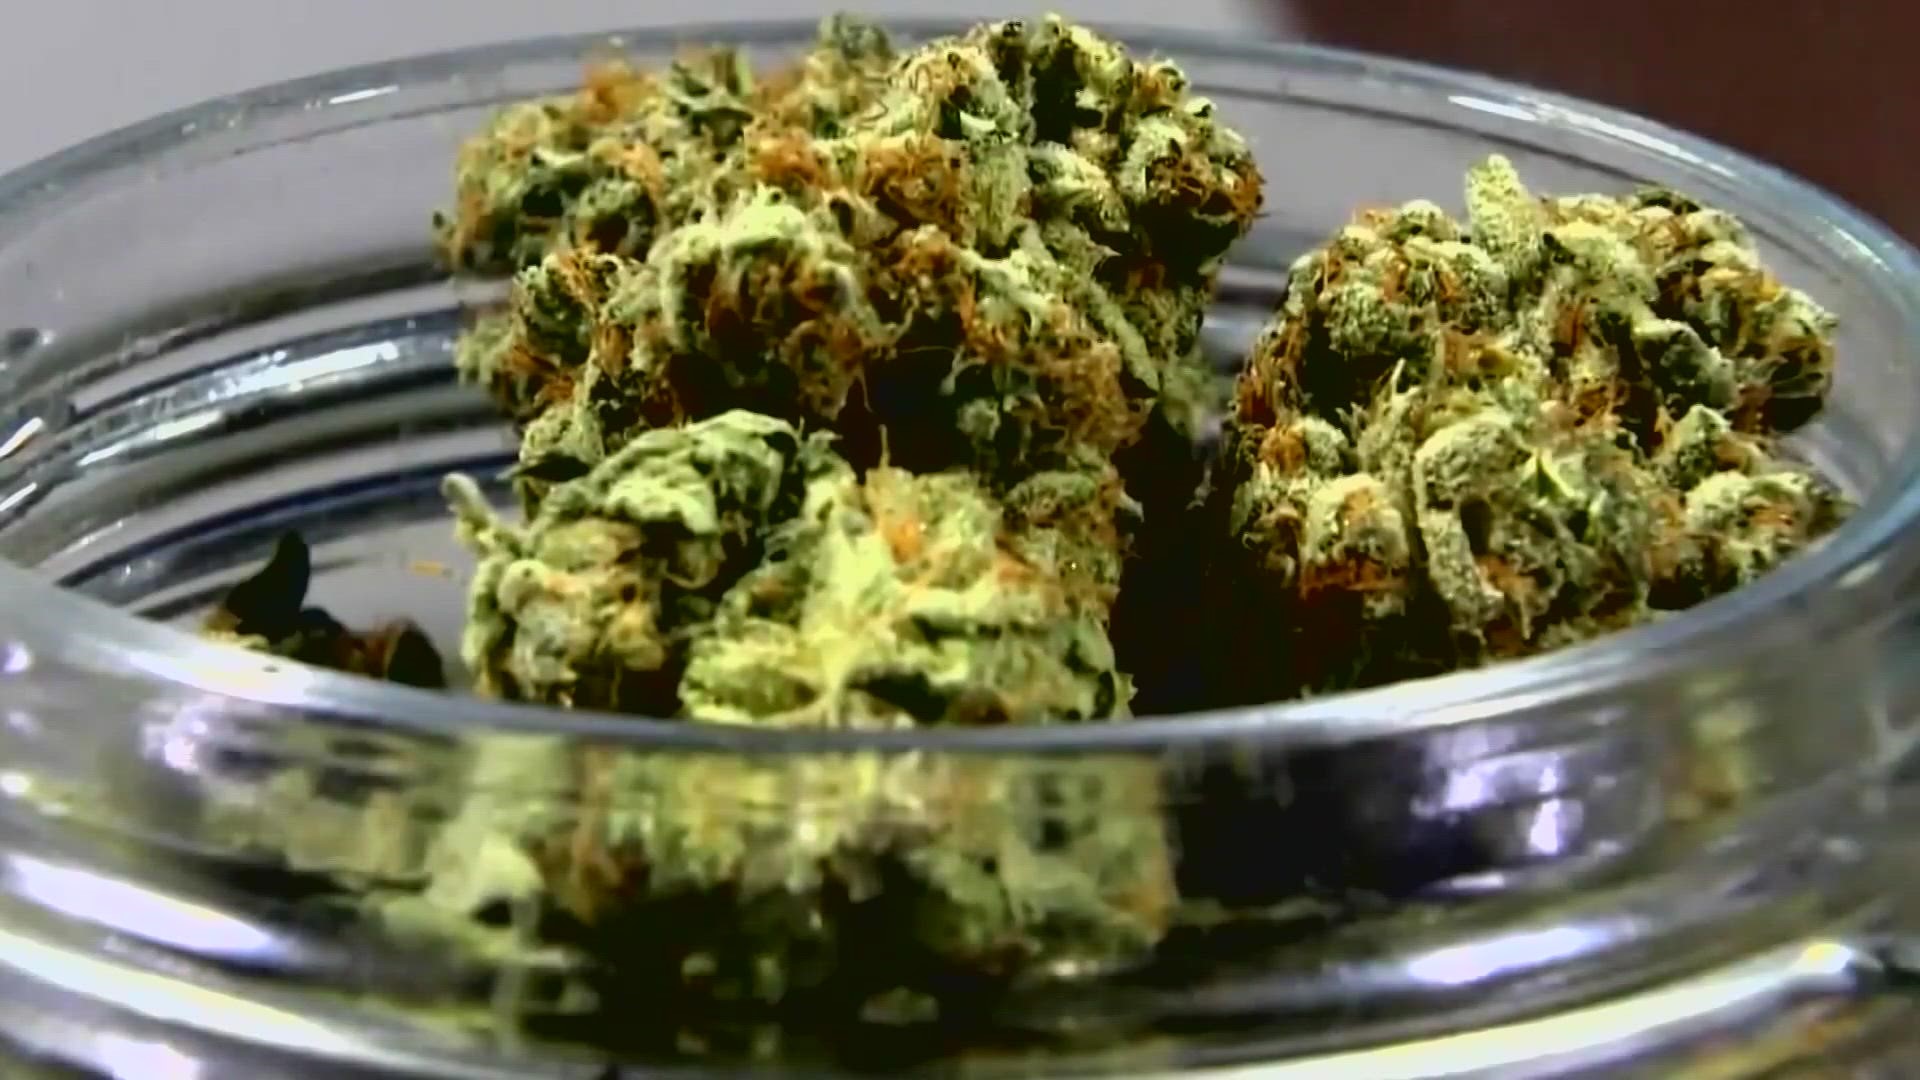 In Arizona, Marijuana is a billion-dollar industry but can you trust what you are buying?